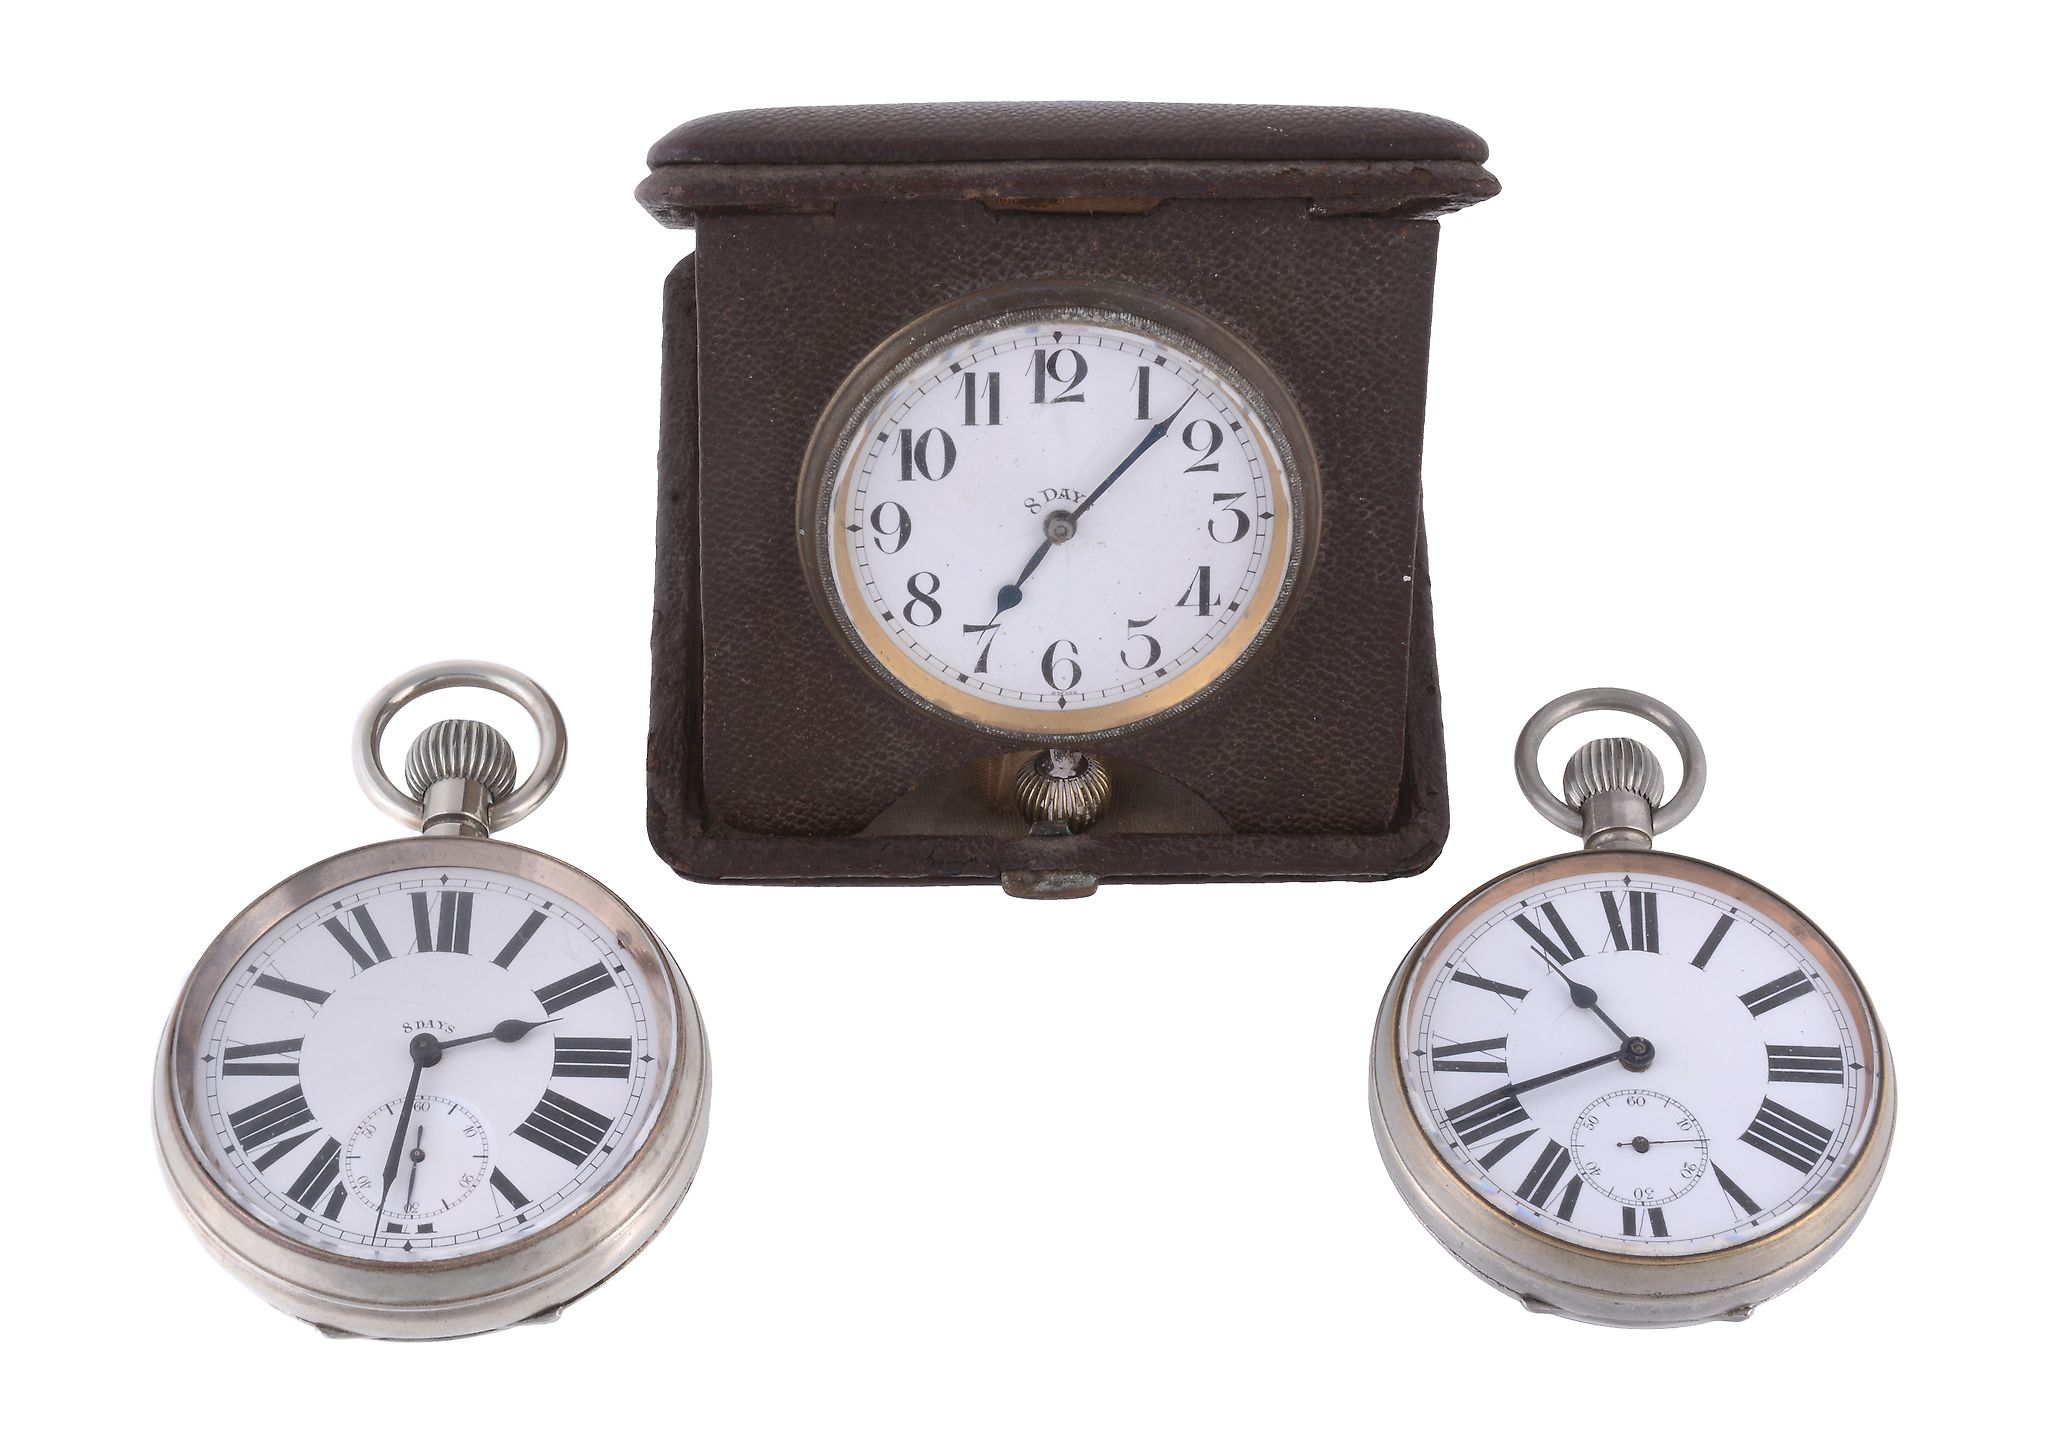 Anon, a leather folding Swiss 8 day travel clock, circa 1920  Anon, a leather folding Swiss 8 day